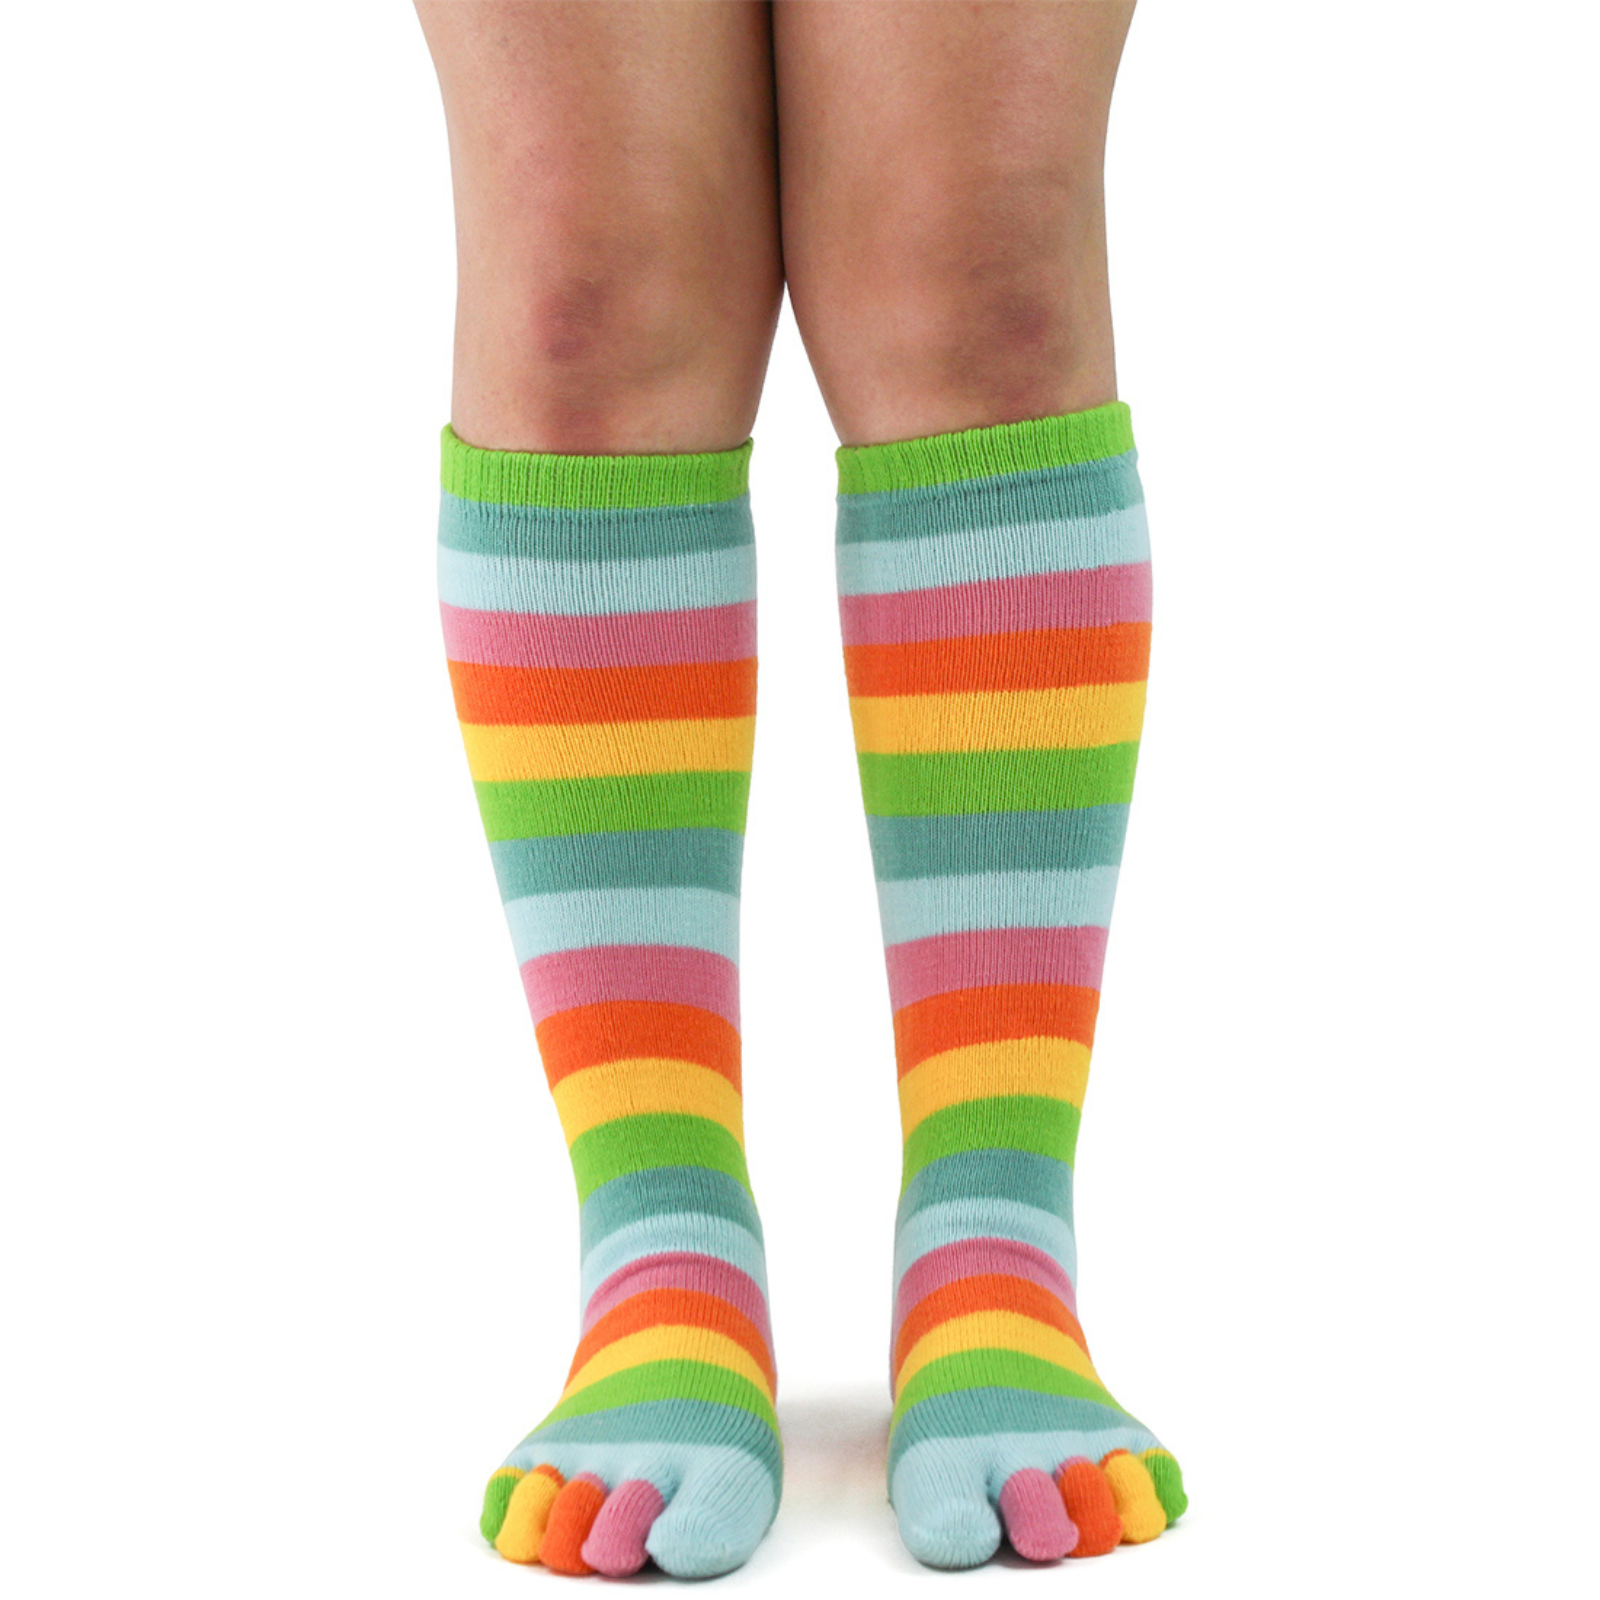 Foot Traffic Rainbow Toe Socks women's knee high sock featuring socks with five toes and stripes worn by model seen from front